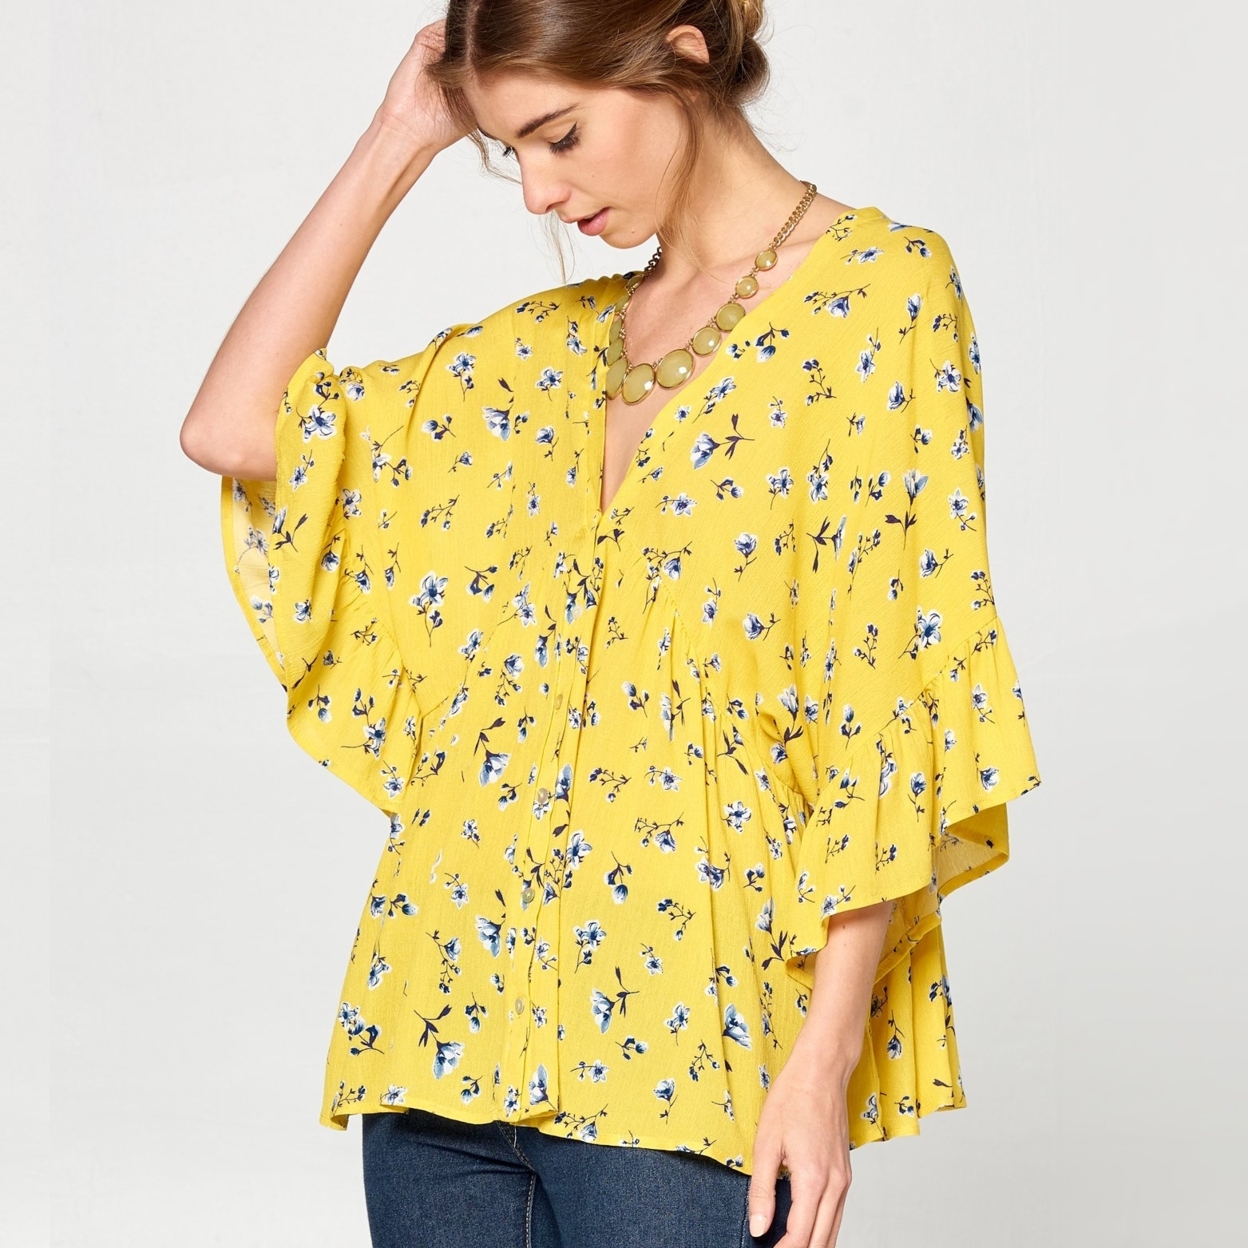 Calico Floral Woven Top - Mustard Yellow, Small (2-6)